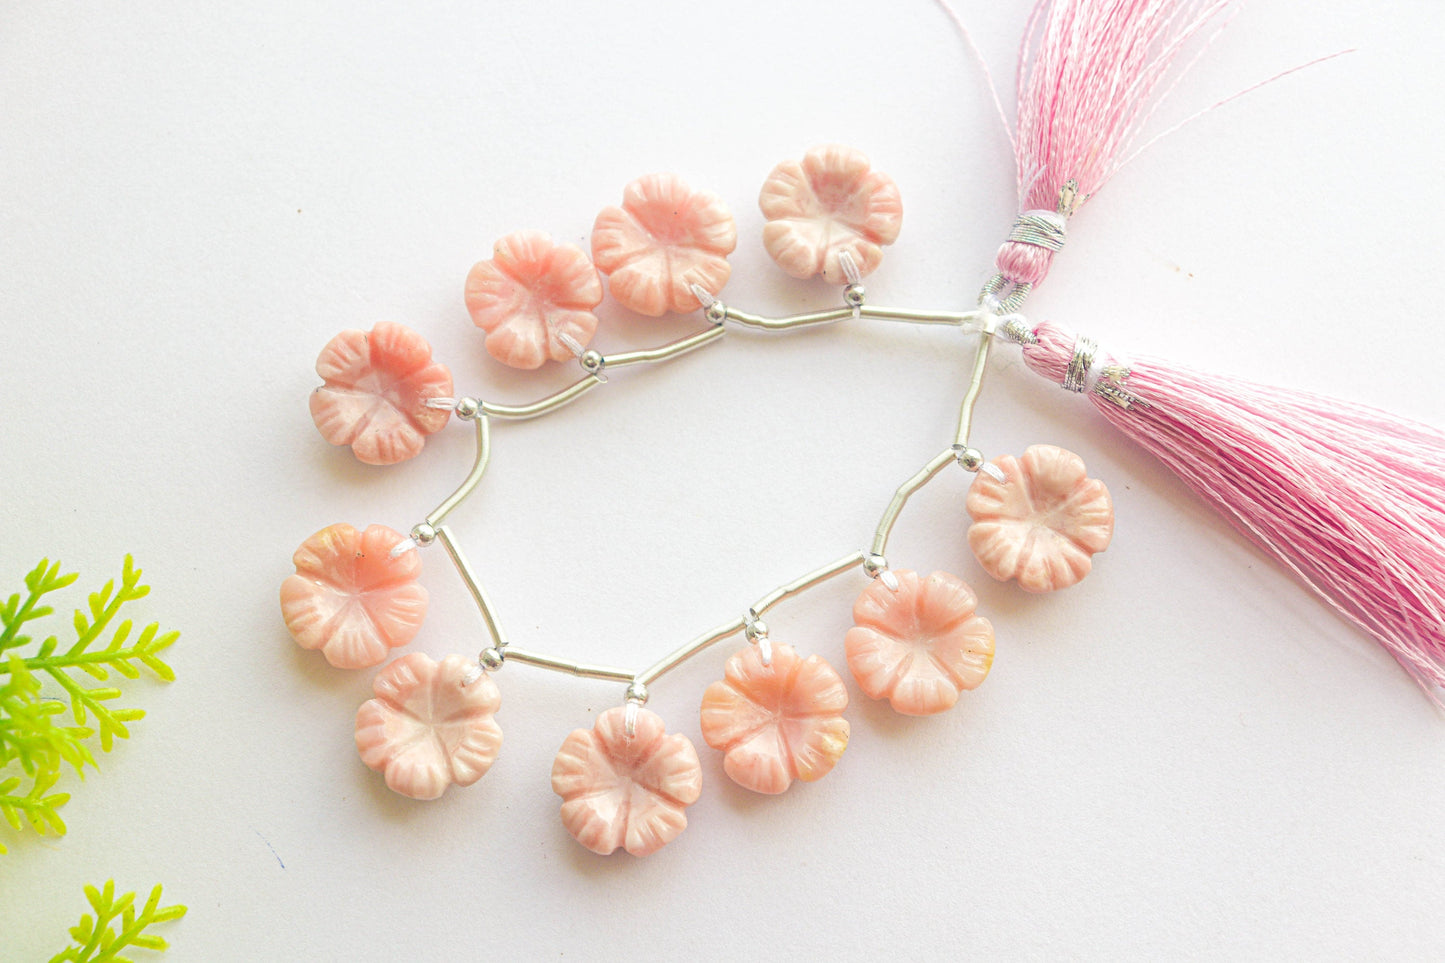 Natural Pink Opal Flower Carving  Beads | 15x15mm | 10 Pieces | Natural Gemstone | Beadsforyourjewellery Beadsforyourjewelry